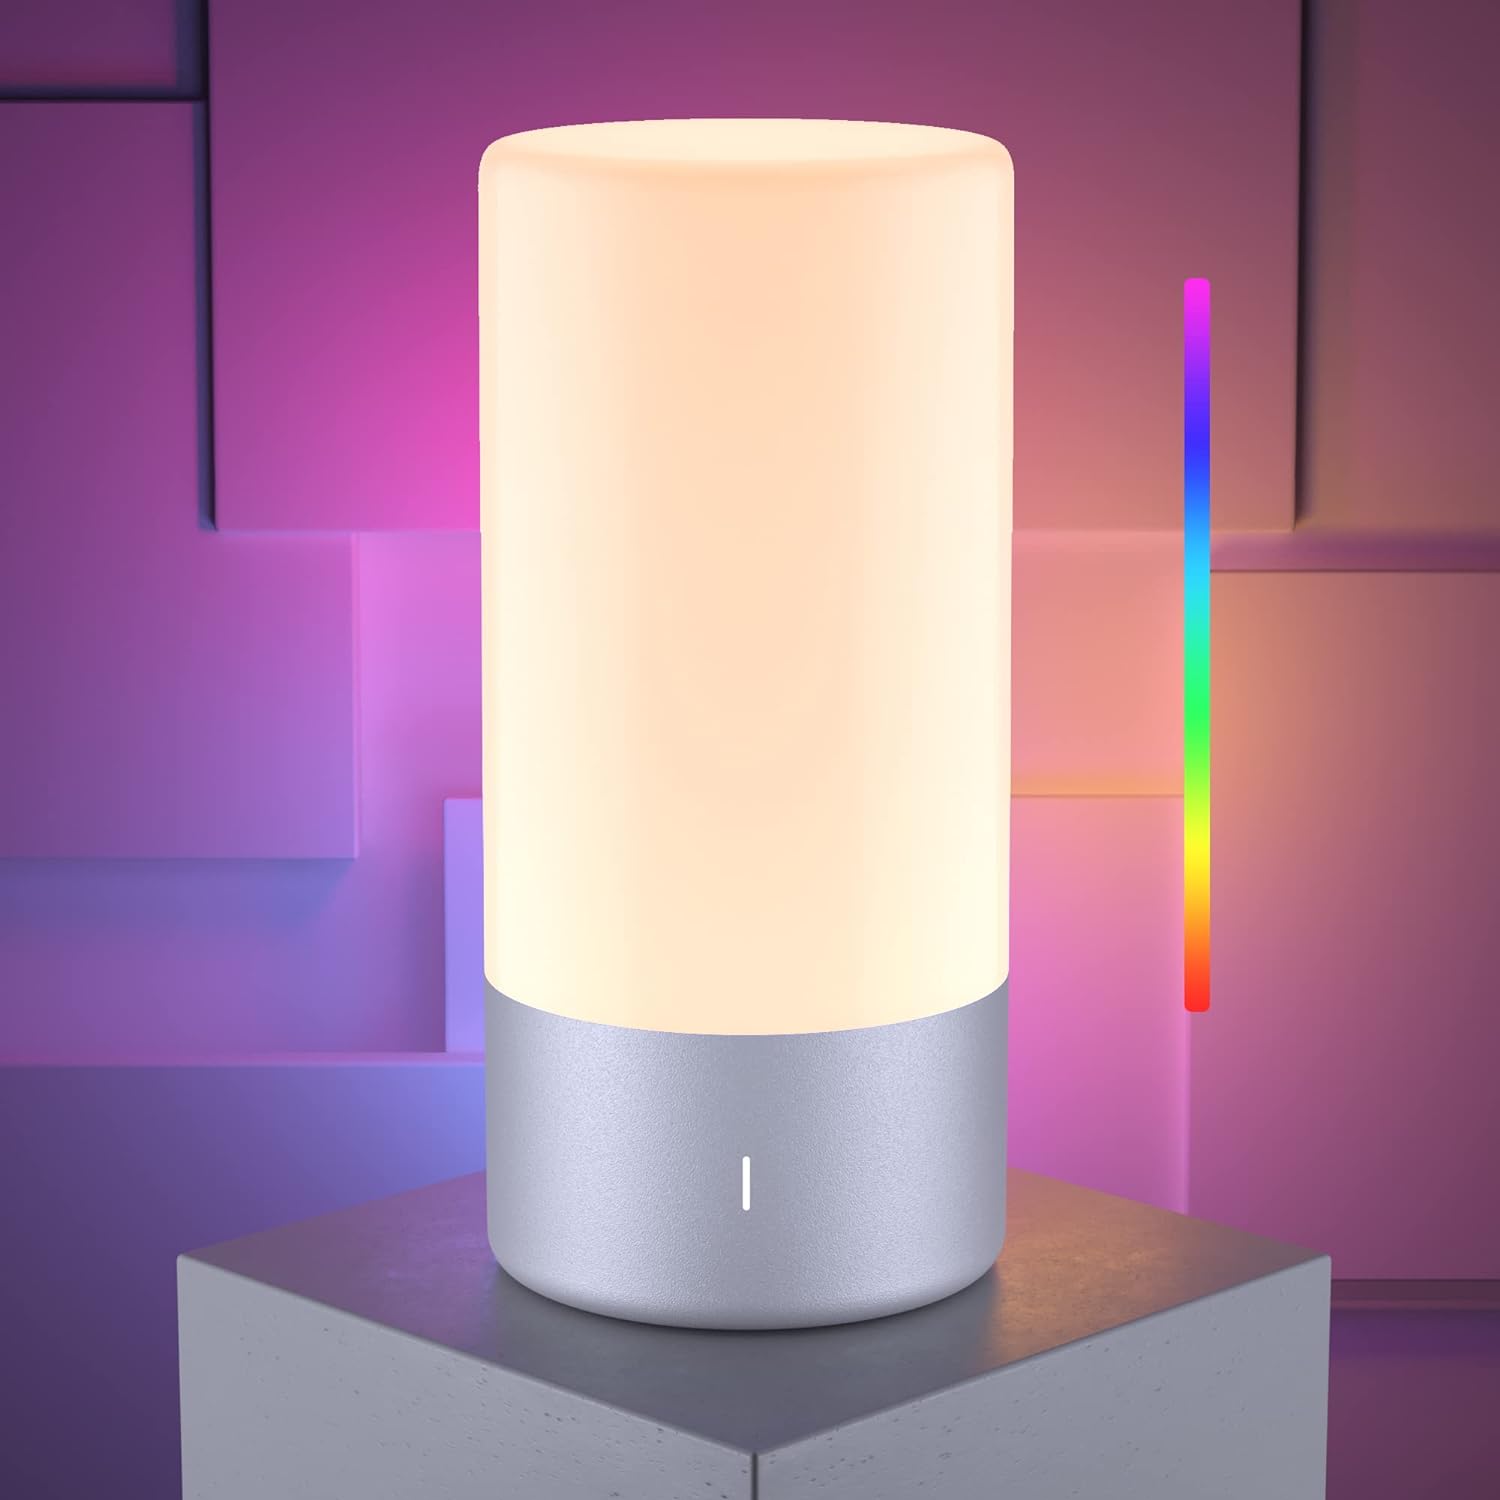 ROOTRO Table Lamp, [Advanced] Bedside Touch Control Lamp for Bedroom 3 Level Dimmable Warm White Lights with 256 RGB Color Mode Modern